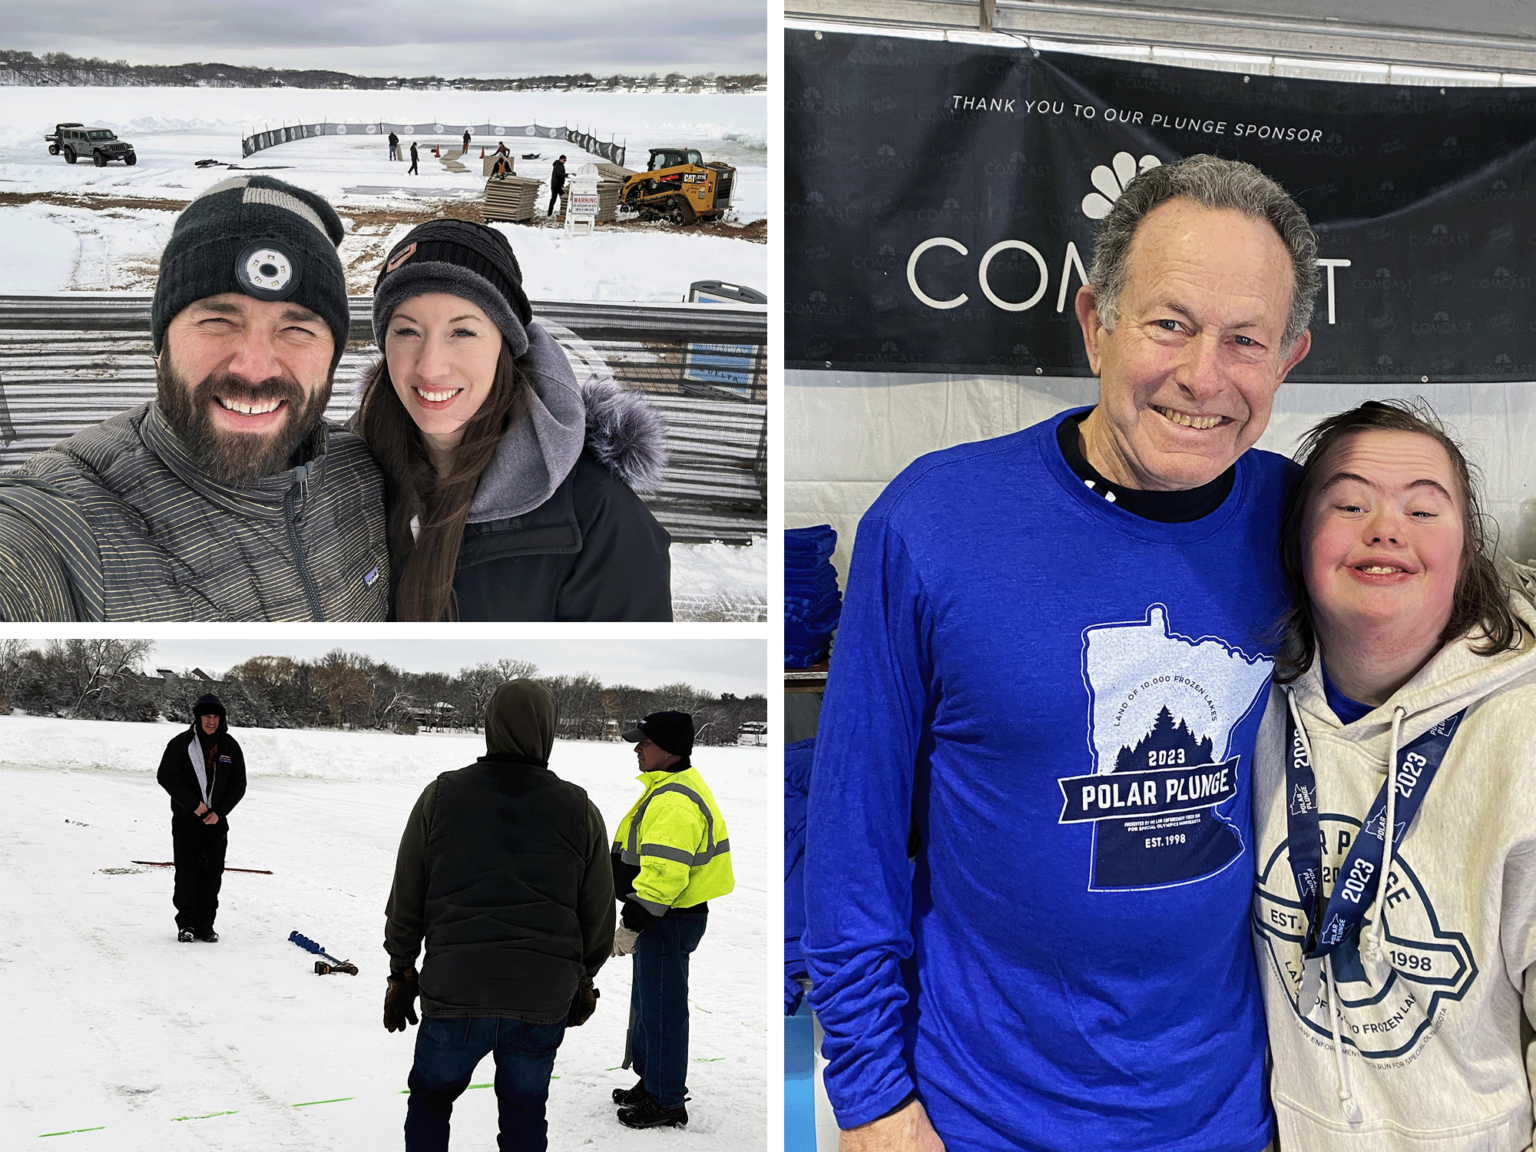 Executive Transportation owners and staff setting up the Polar Plunge site in Eden Prairie last week.